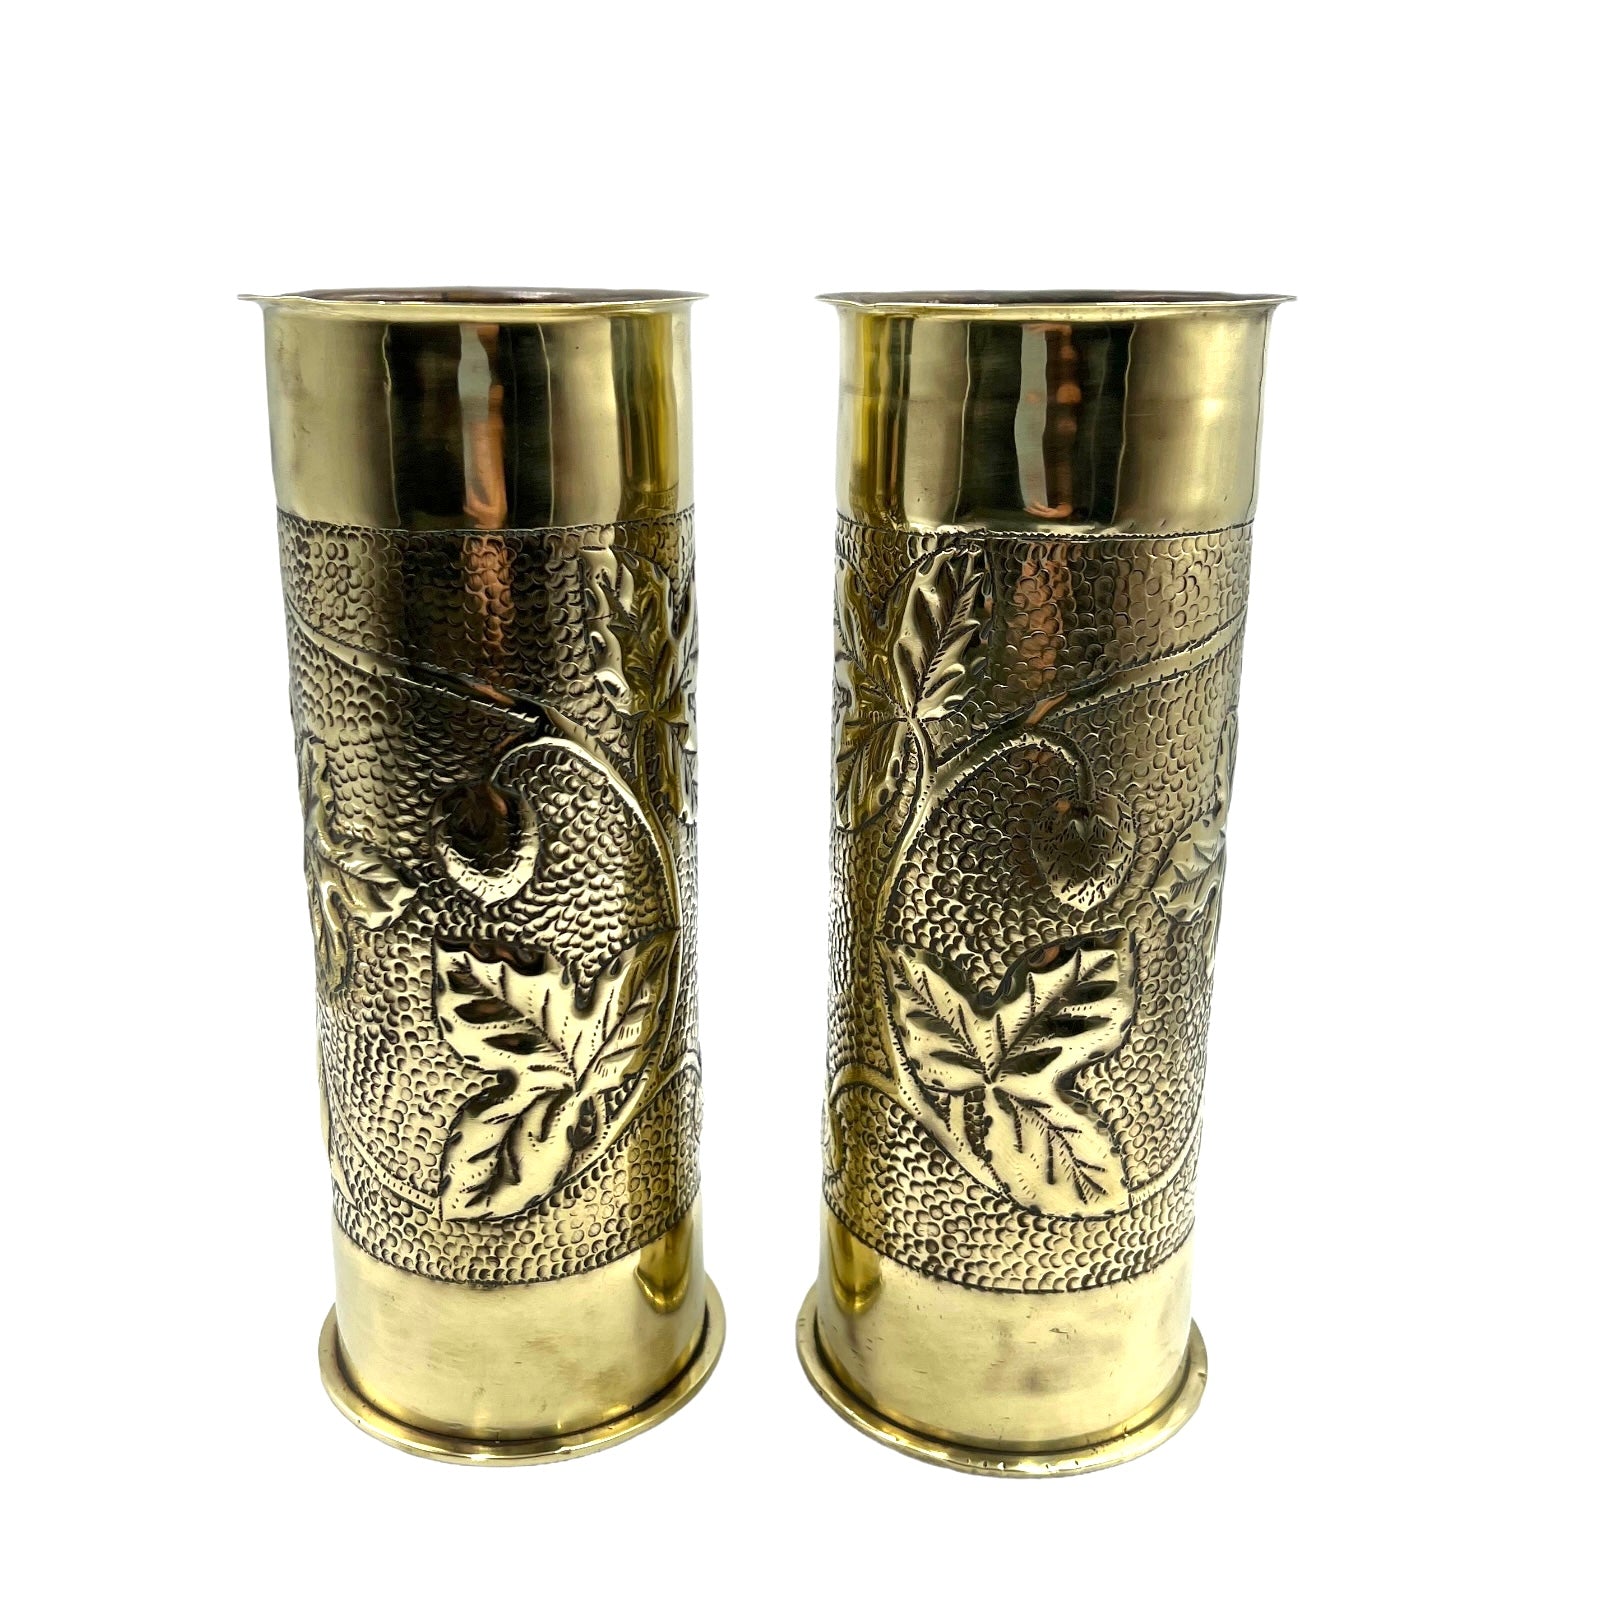 Pair of German trench art shell case vases